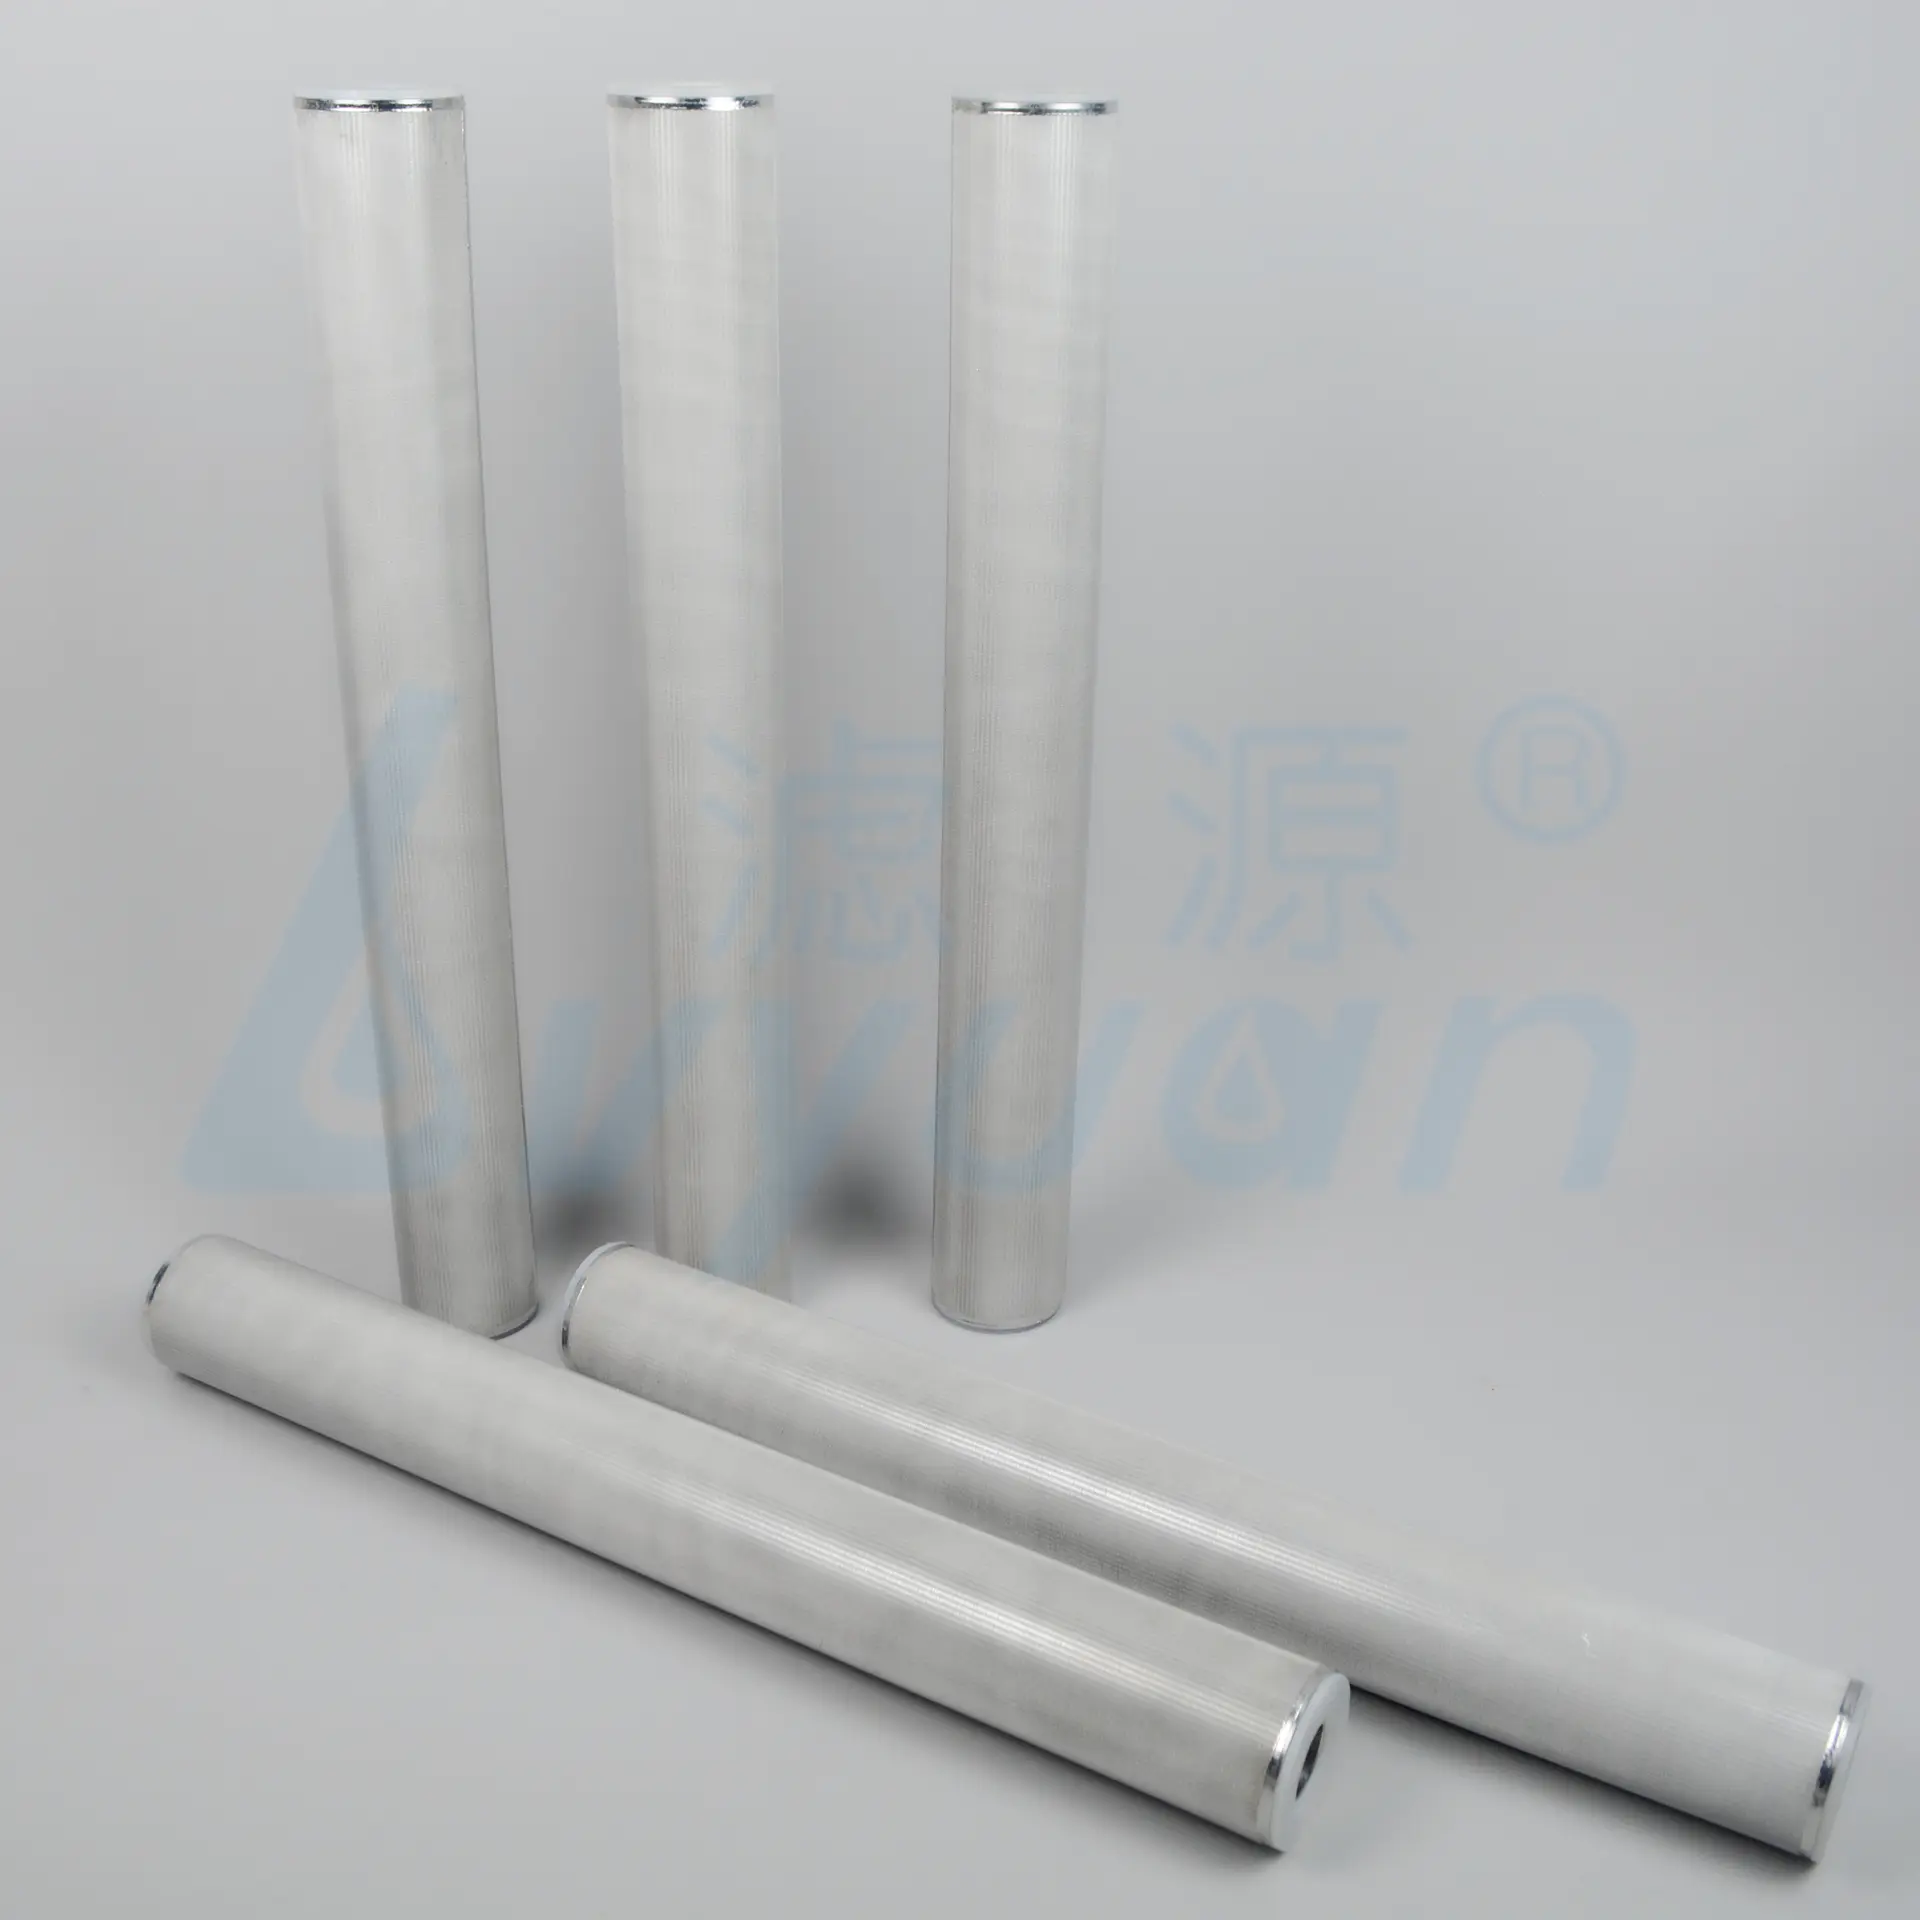 Good Quality stainless steel sintered Filter Cartridge for oil filtration and filter water